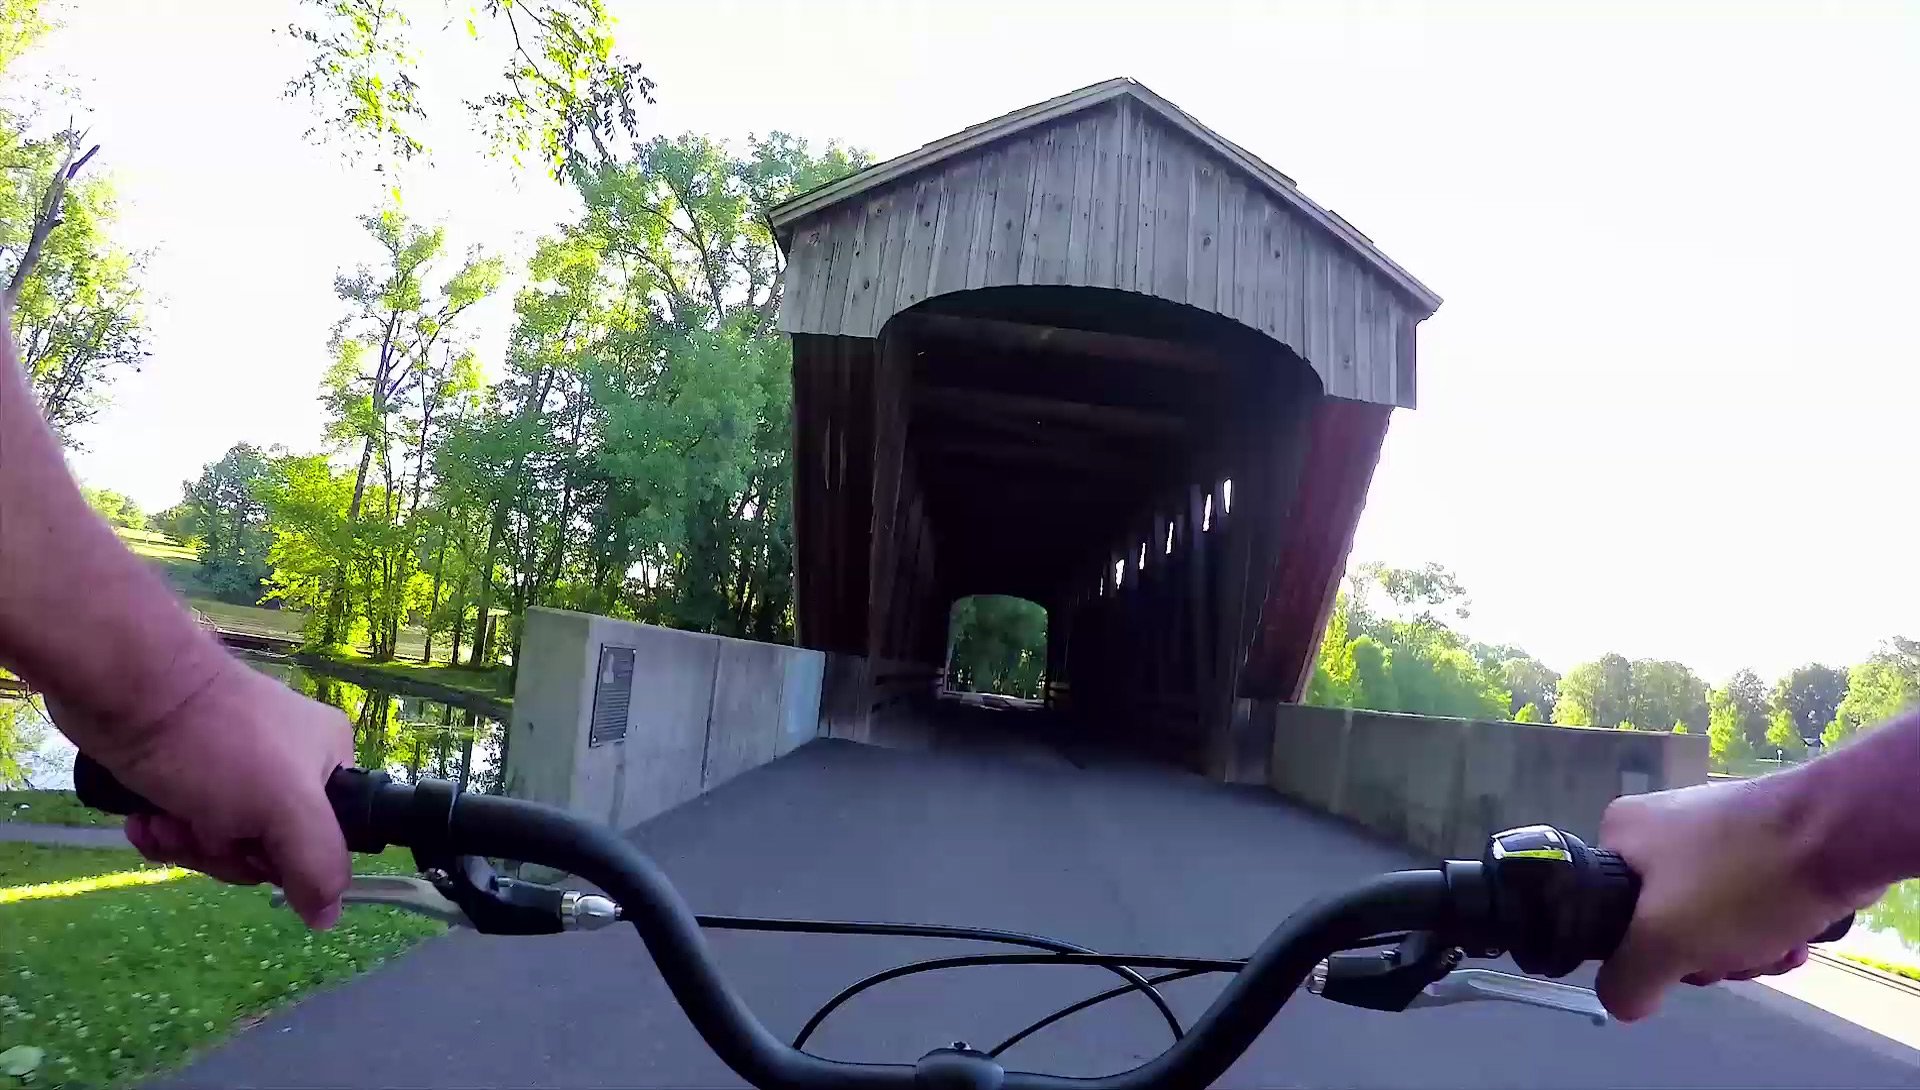 POV angle of active person riding a bicycle toward a covered bridge in Columbus, Indiana.